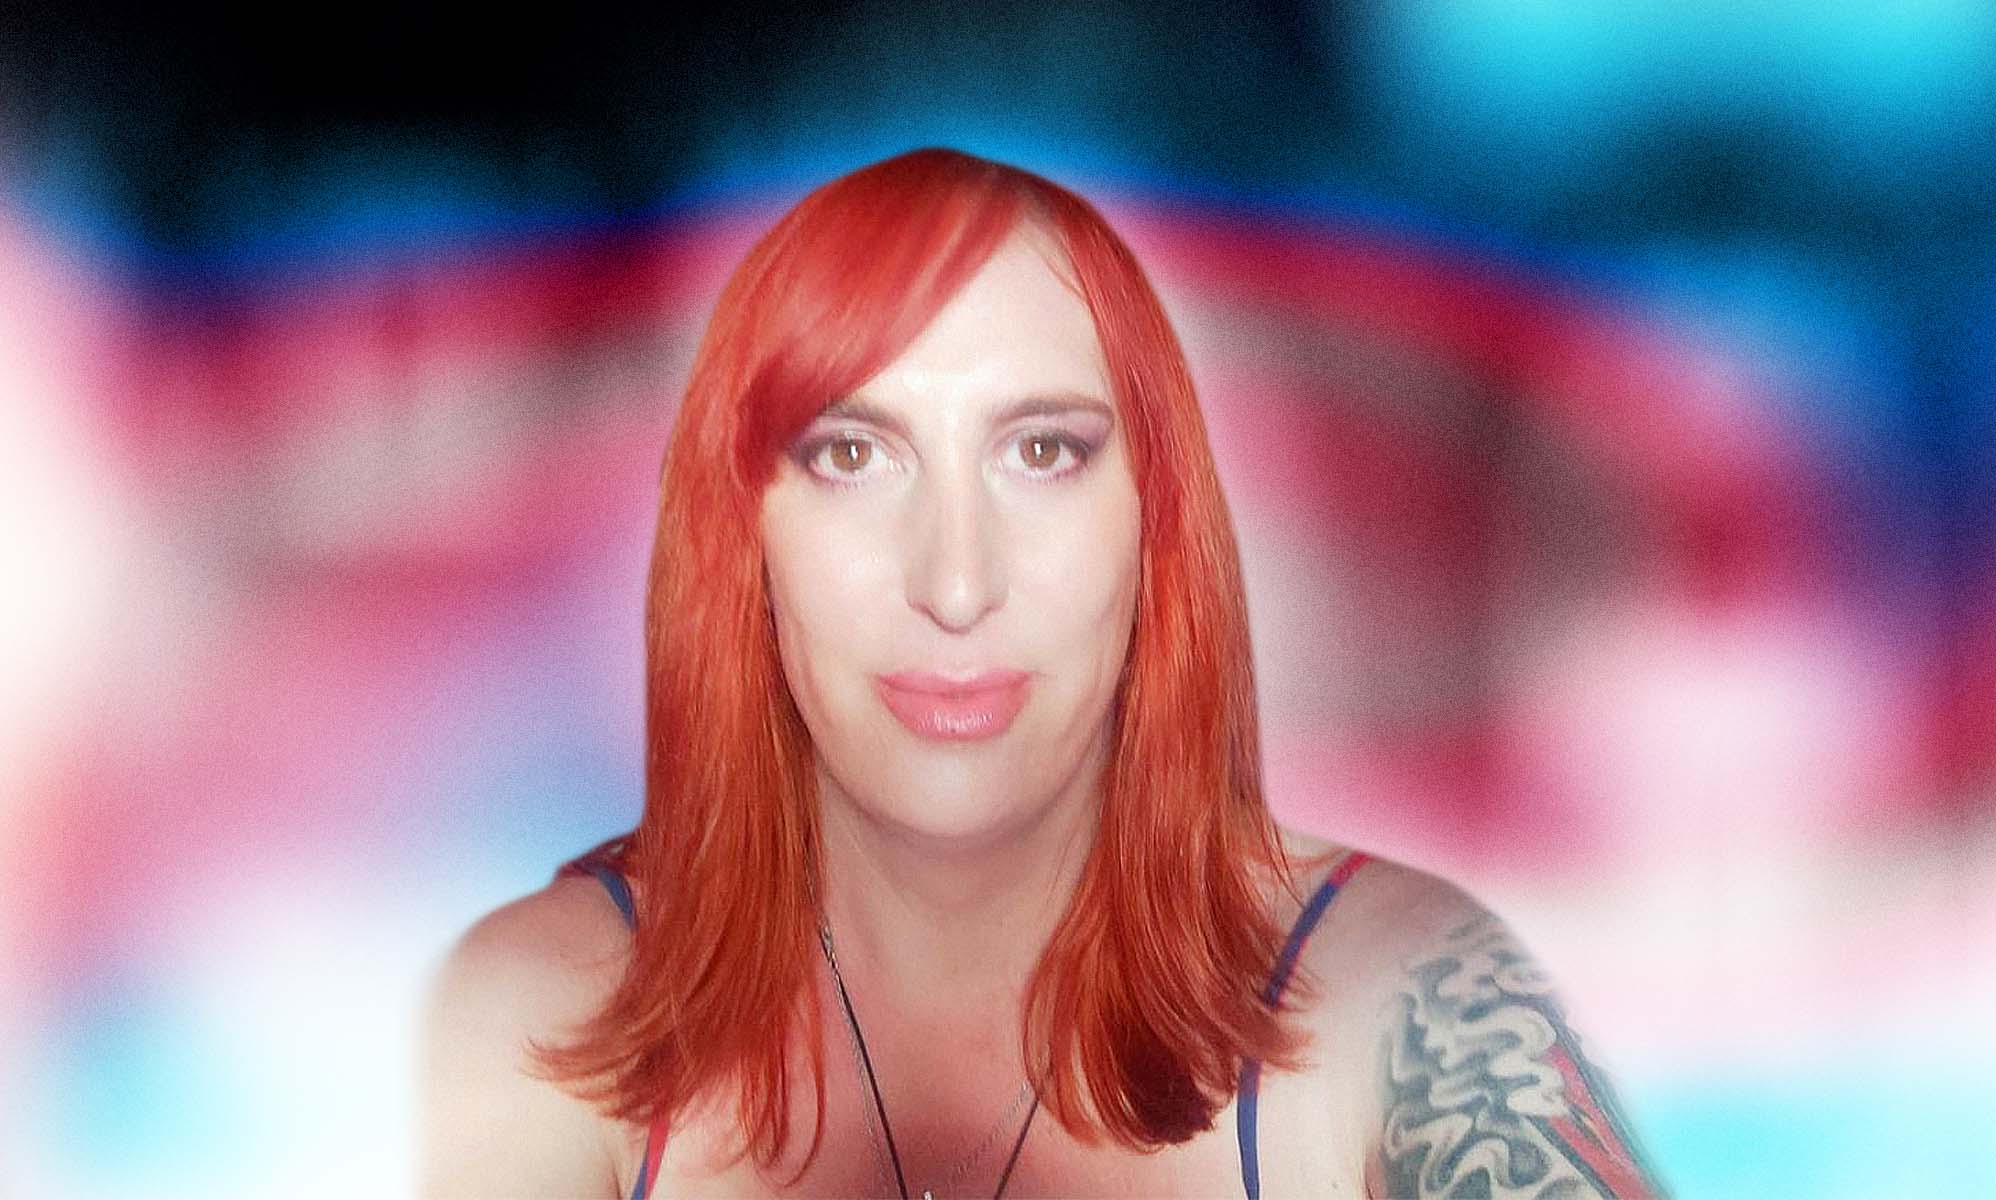 Trans woman shooed out of salons starts own beauty business